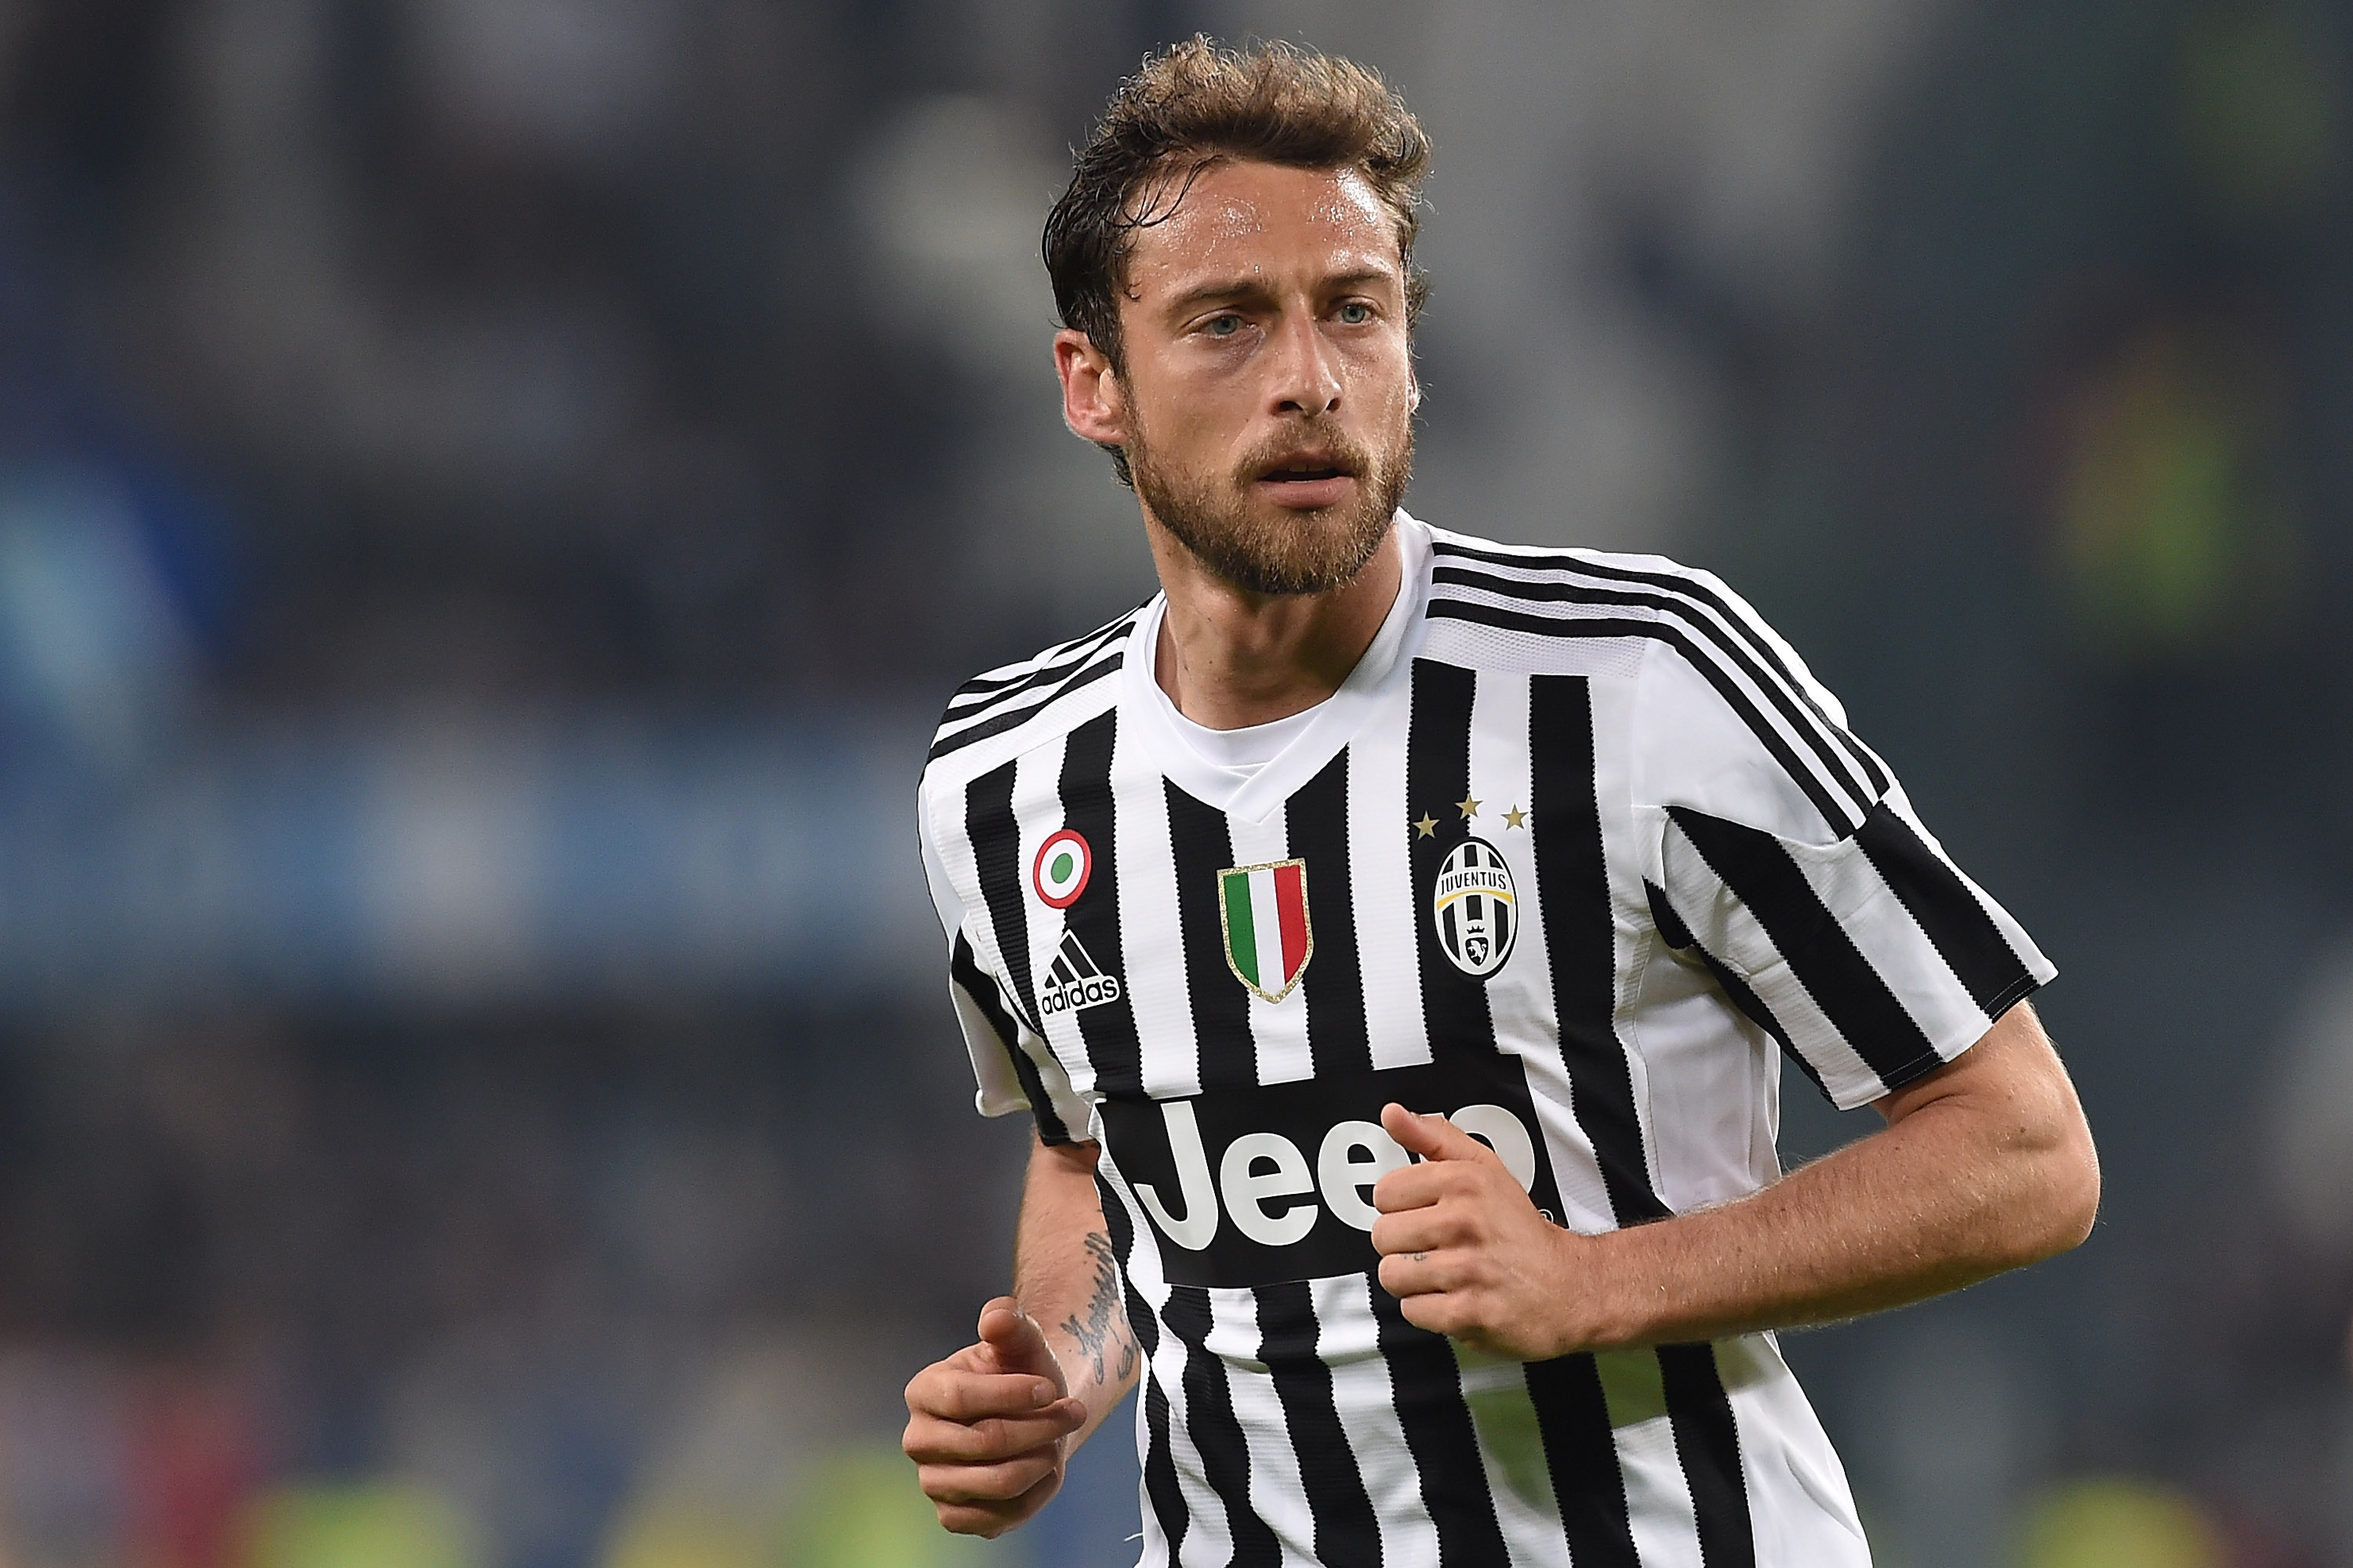 Claudio Marchisio Injured, but Juventus Must Find a Way to Keep Winning